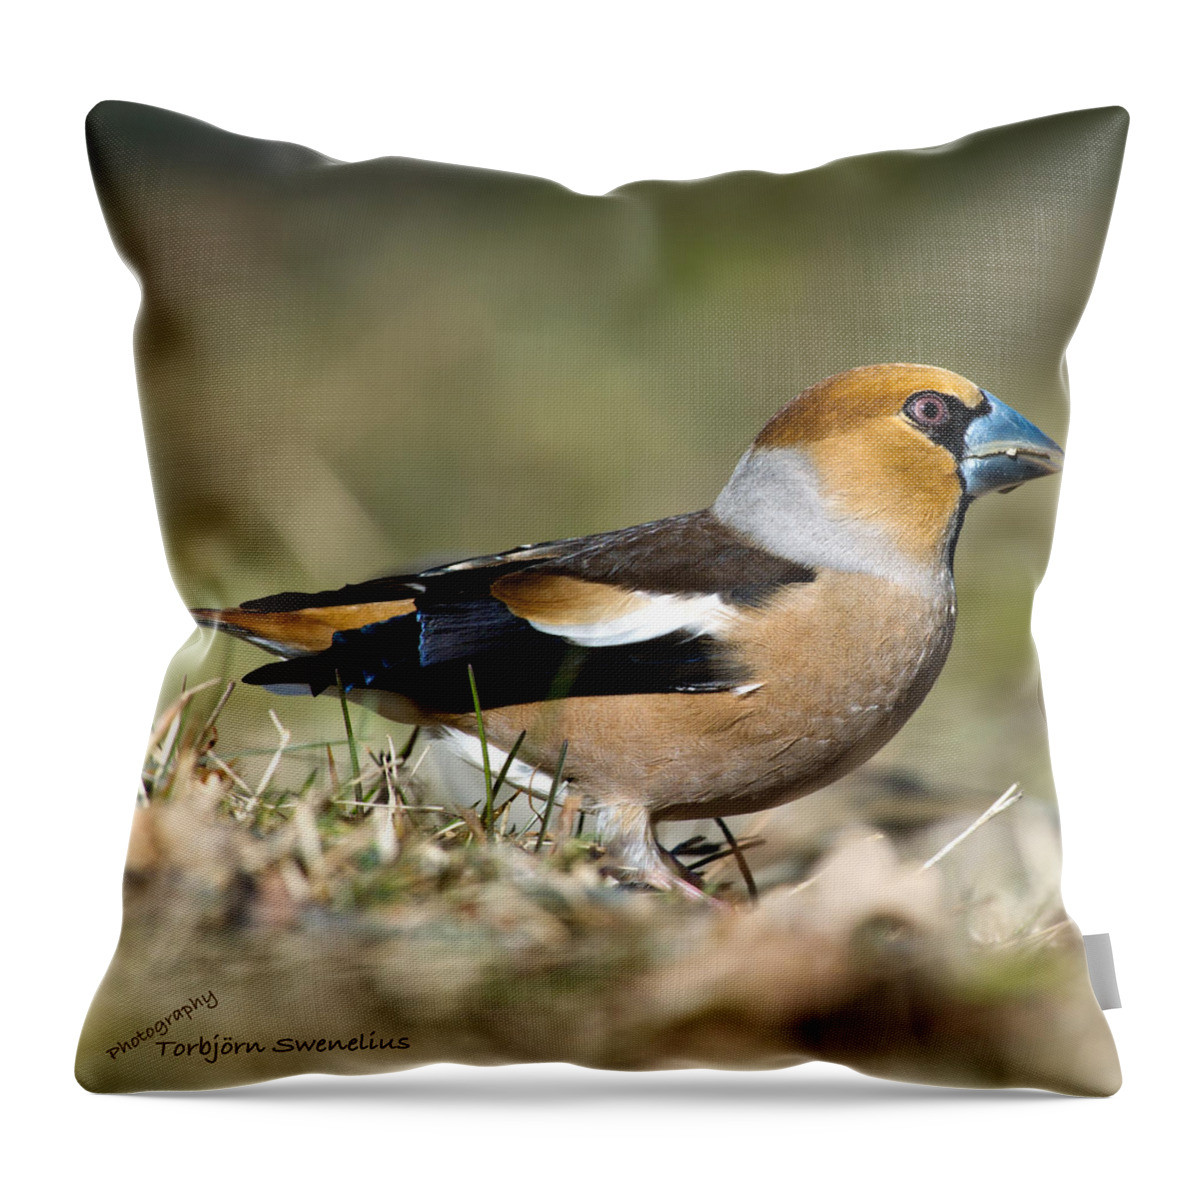 Hawfinch's Profile Square Throw Pillow featuring the photograph Hawfinch's Profile Square by Torbjorn Swenelius